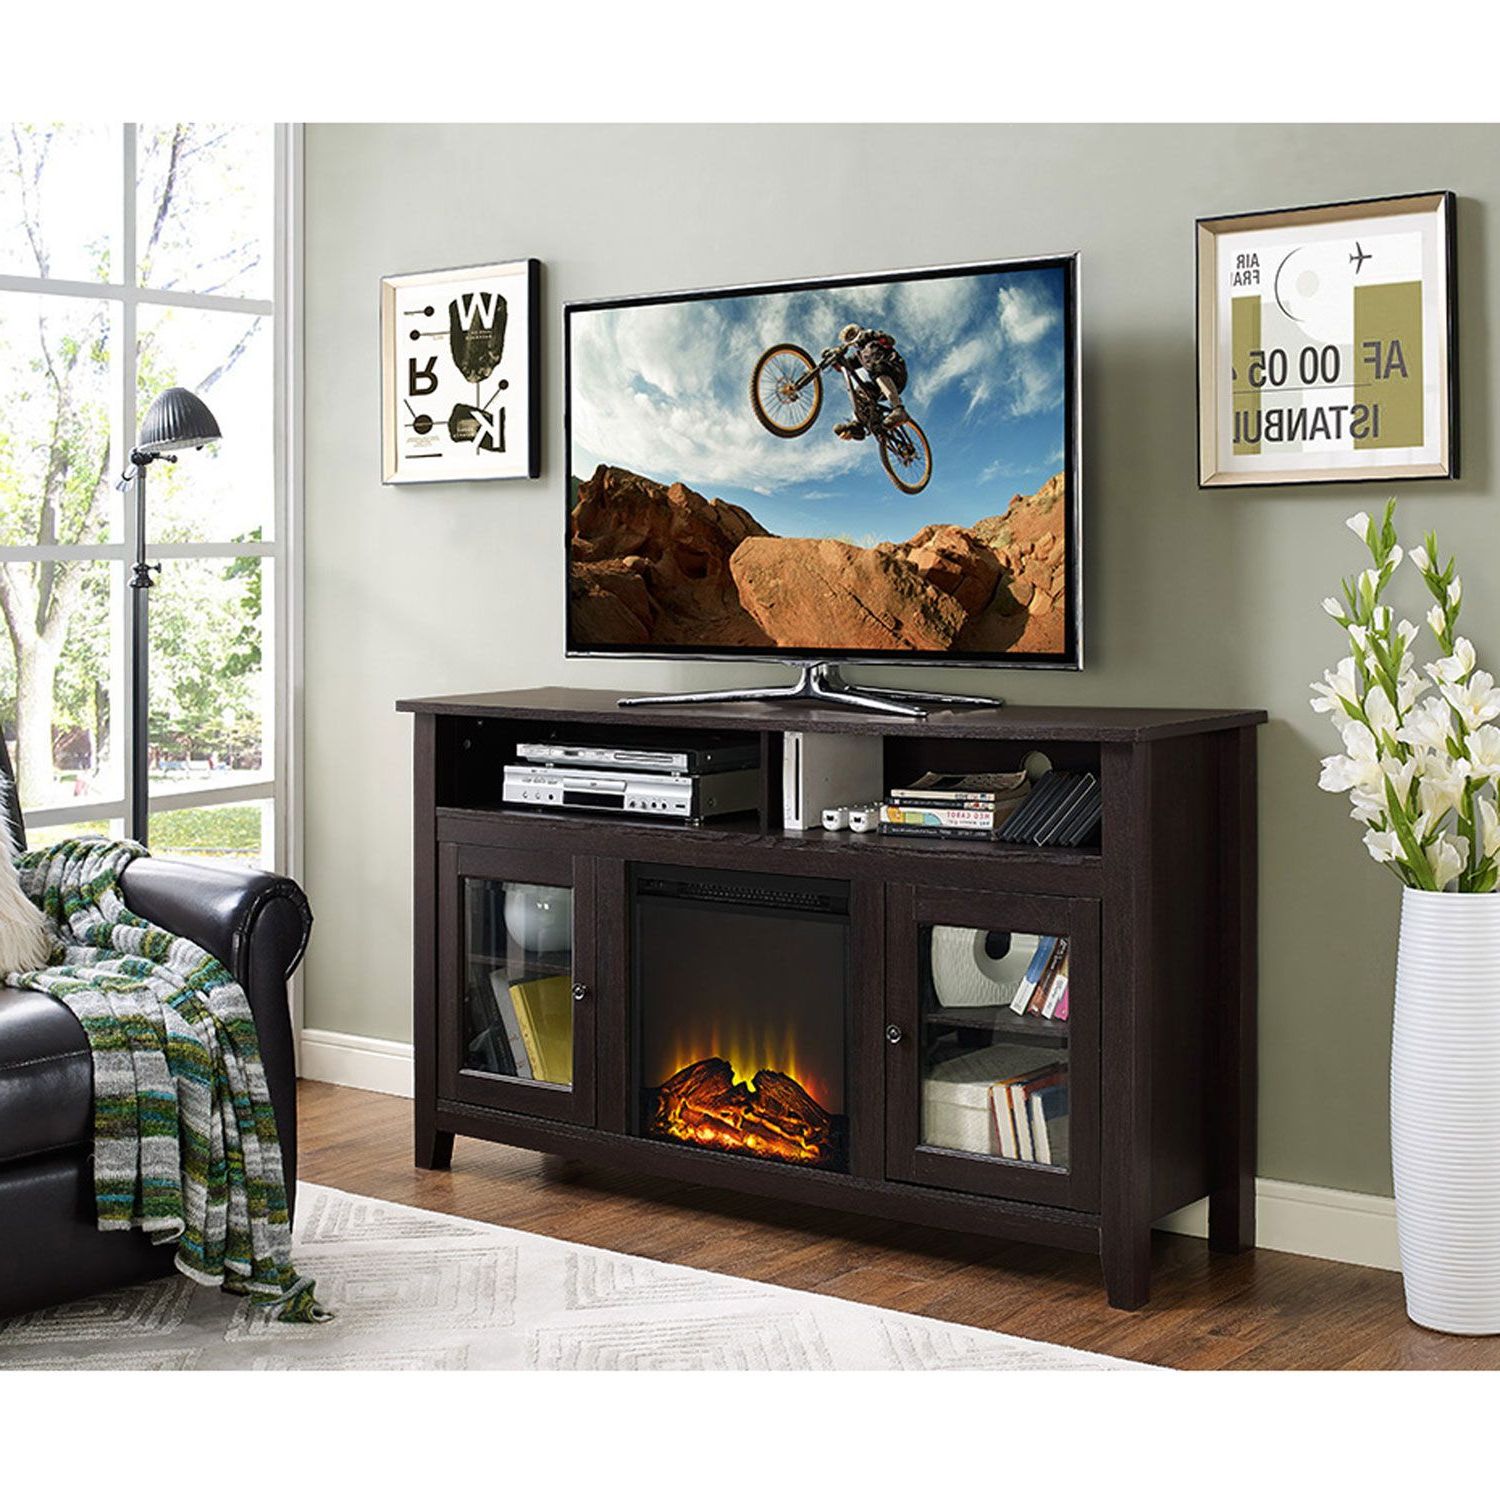 Walker Edison Furniture Co. 58 Inch Wood Highboy Fireplace Tv Stand –  Espresso W58fp18hbes | Fireplace Tv Stand, Home Entertainment Furniture,  Osp Home Furnishings Intended For Wood Highboy Fireplace Tv Stands (Gallery 20 of 20)